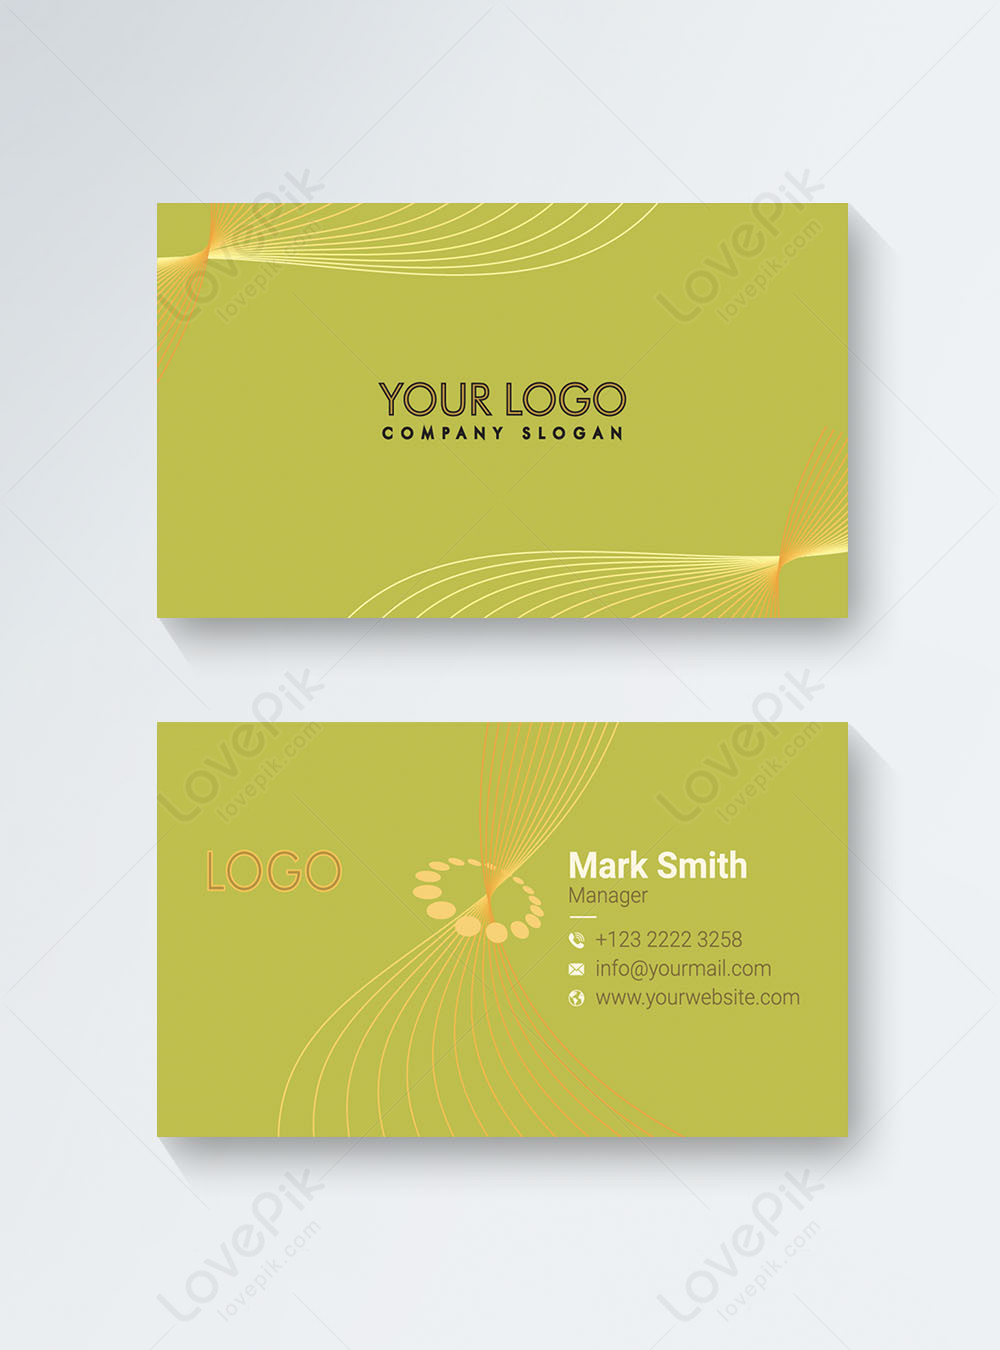 creative-business-card-template-image-picture-free-download-450111698